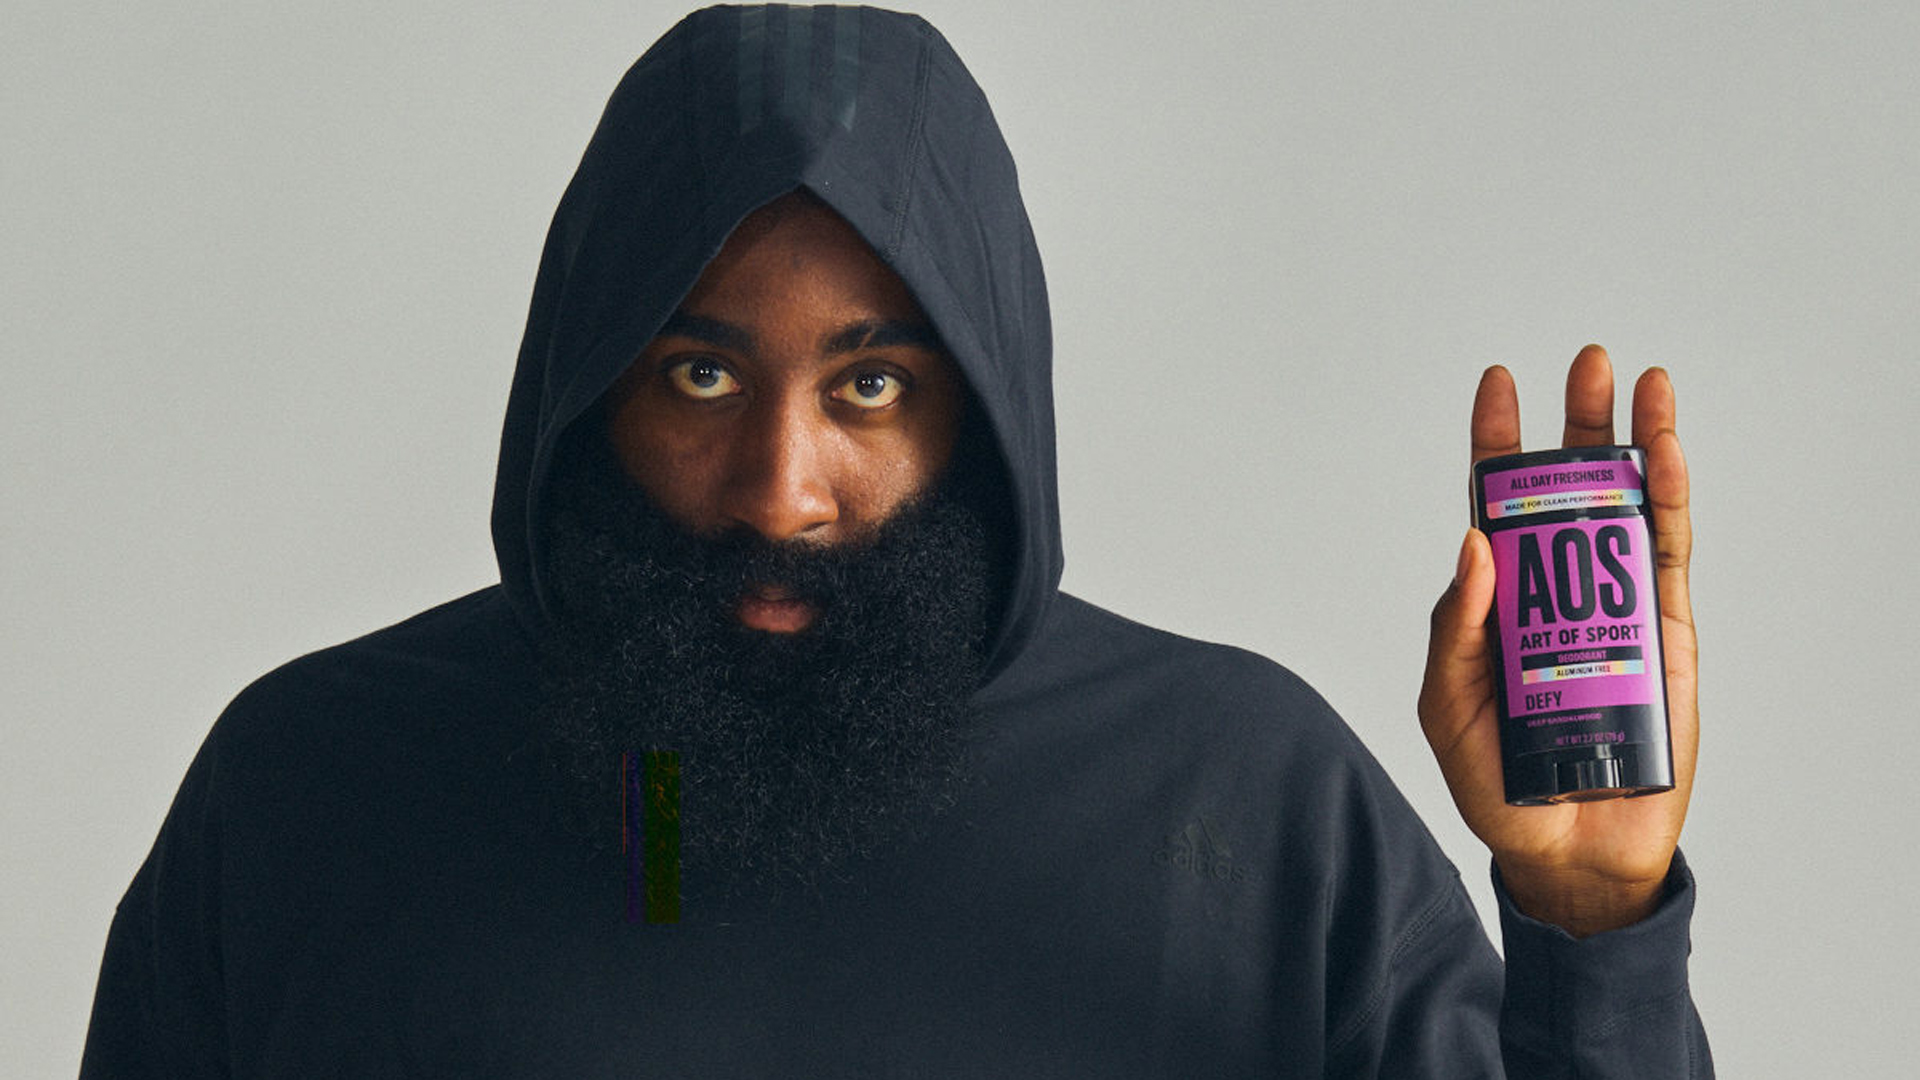 James Harden Releases New Fragrance Through Body Care Line Co-Founded By The Late Kobe Bryant